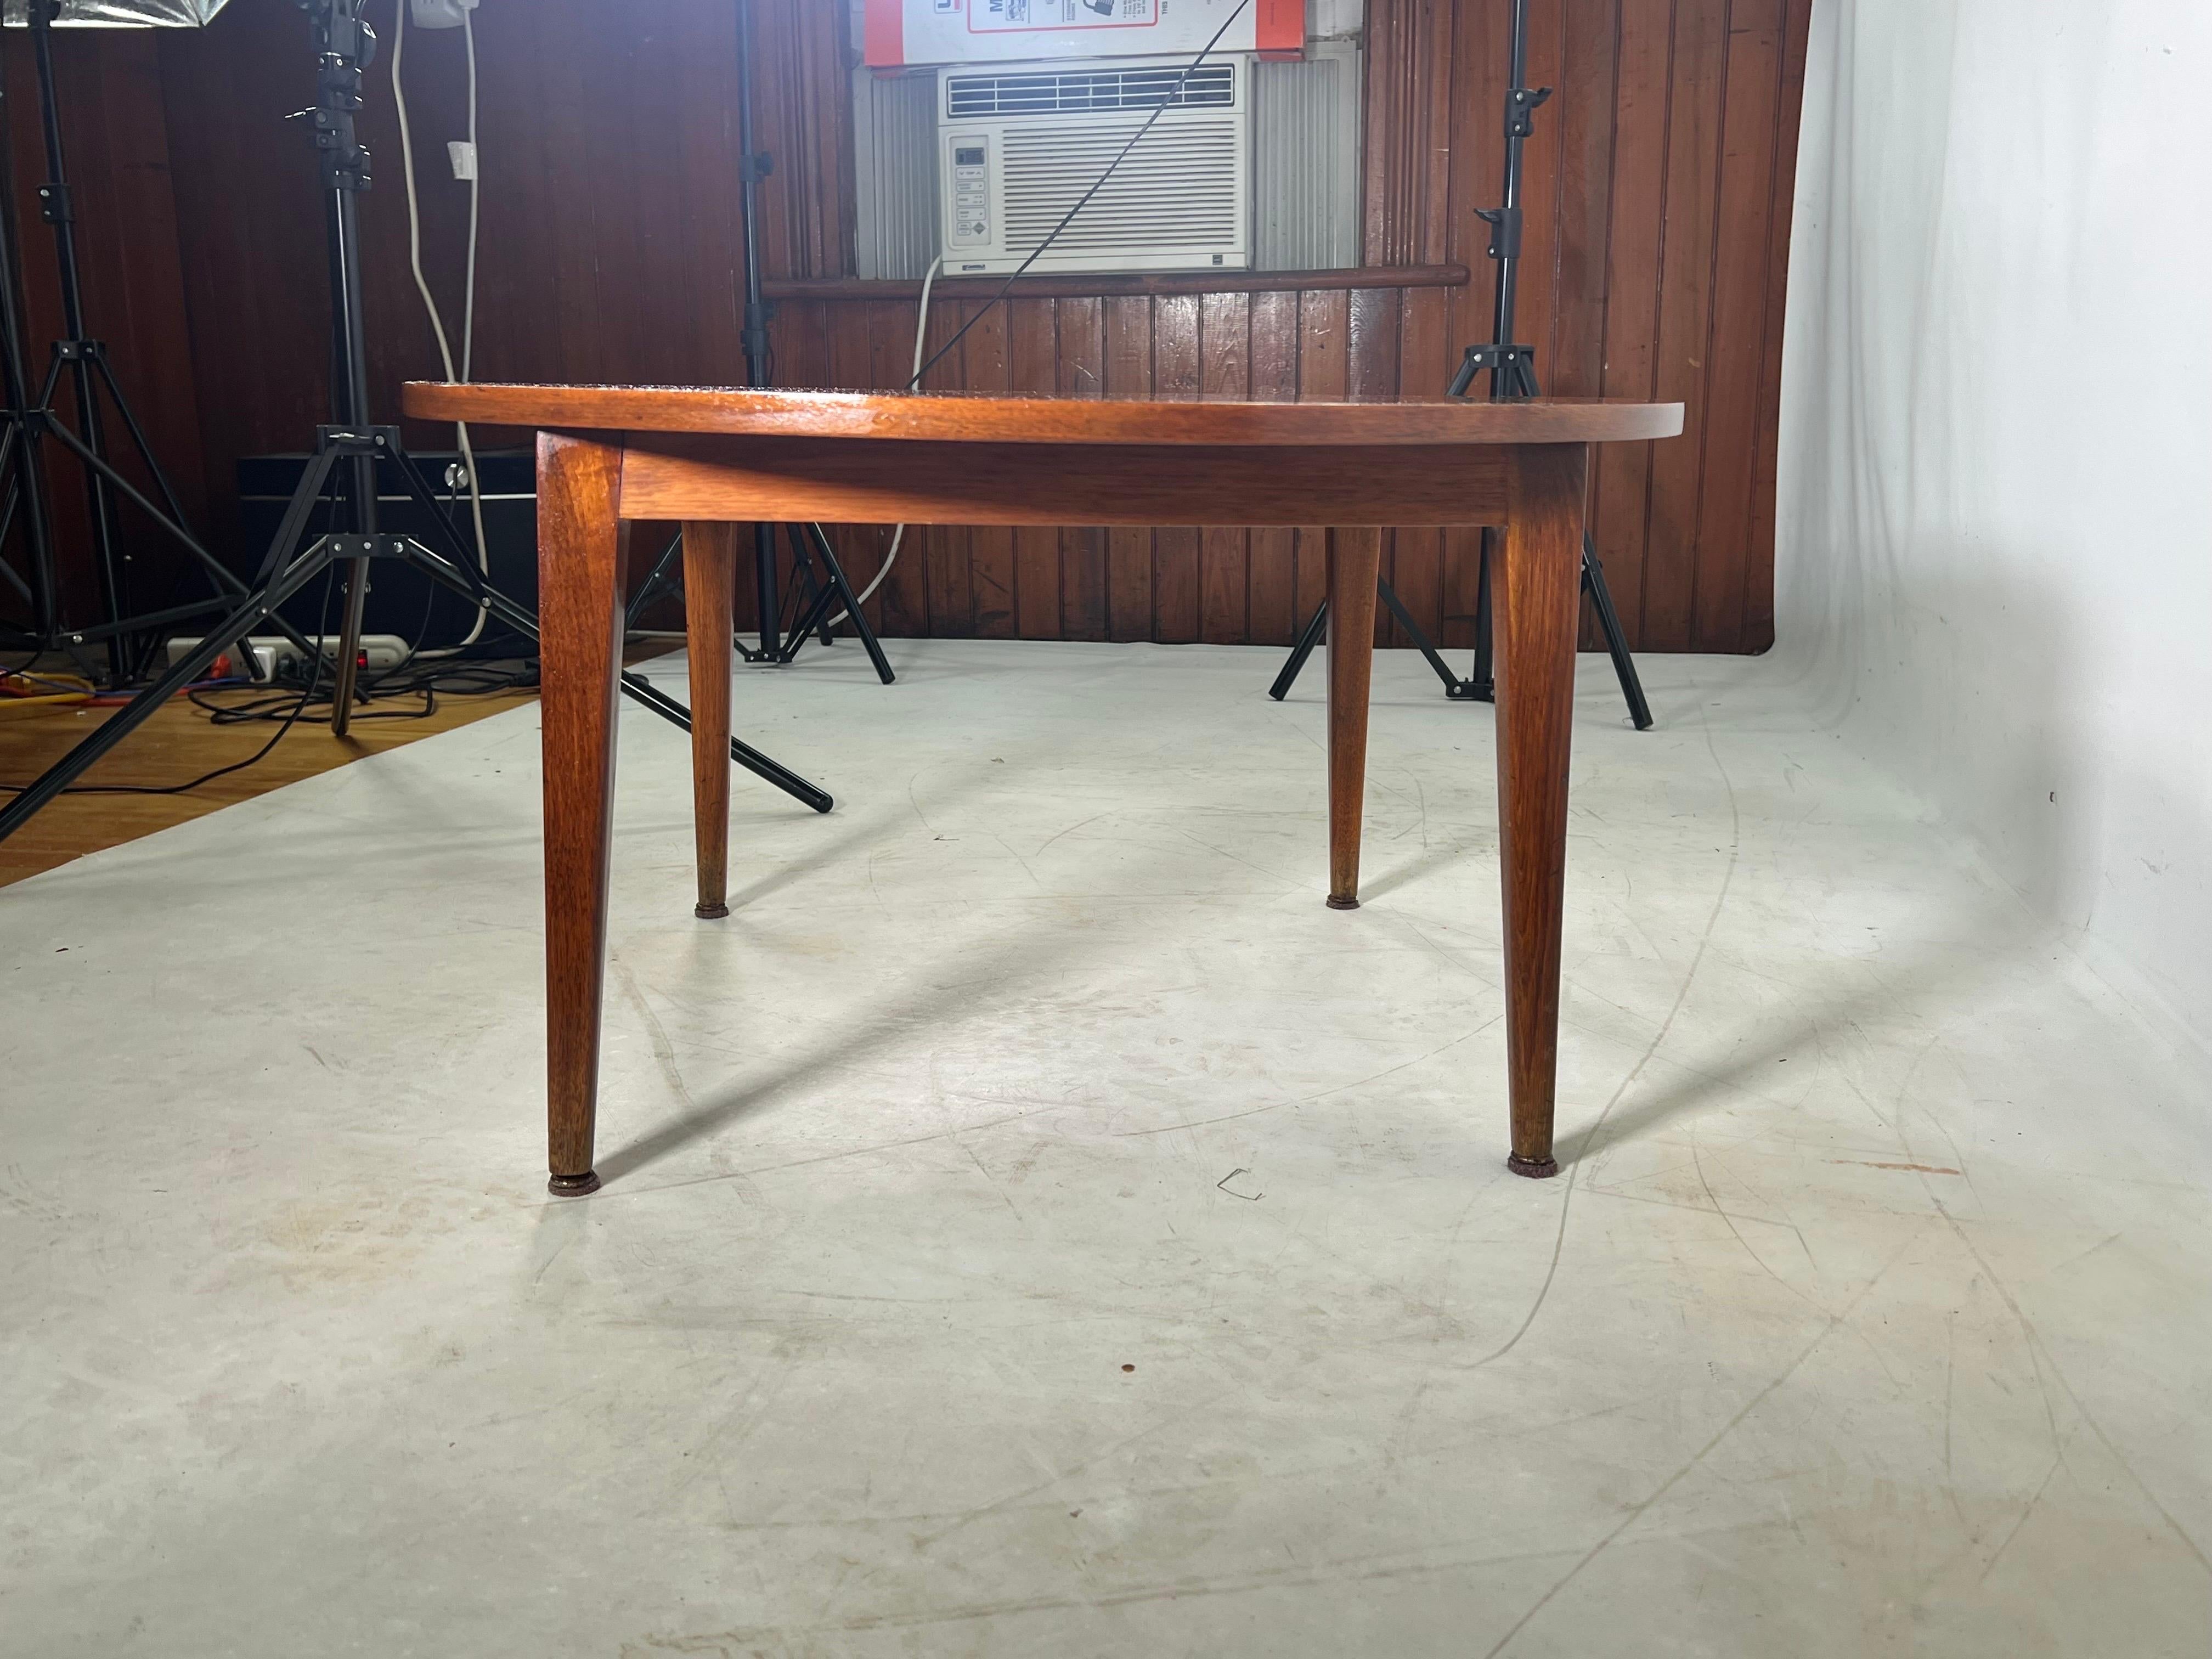 The coffee table has very nice wood grain and is made out of walnut. The table is light weight and looks to be in the Danish style. We currently have two tables available. Each table is 499.